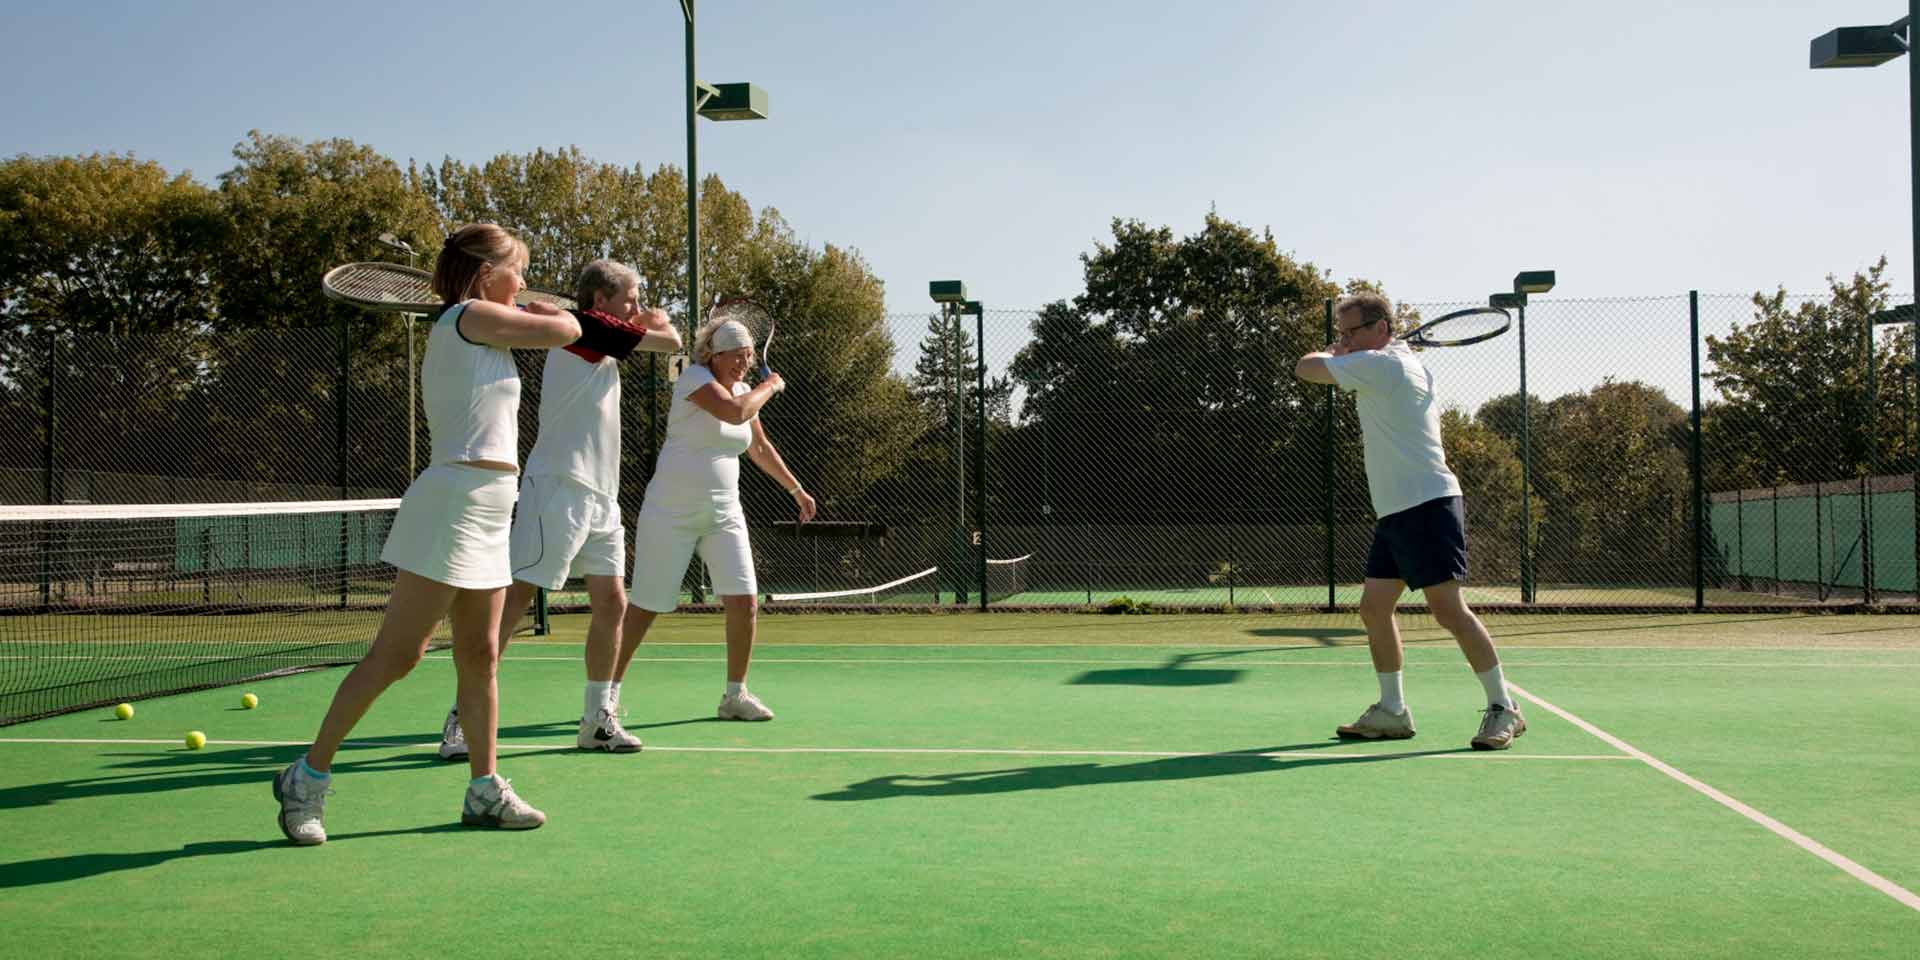 Group of people learning how to play tennis